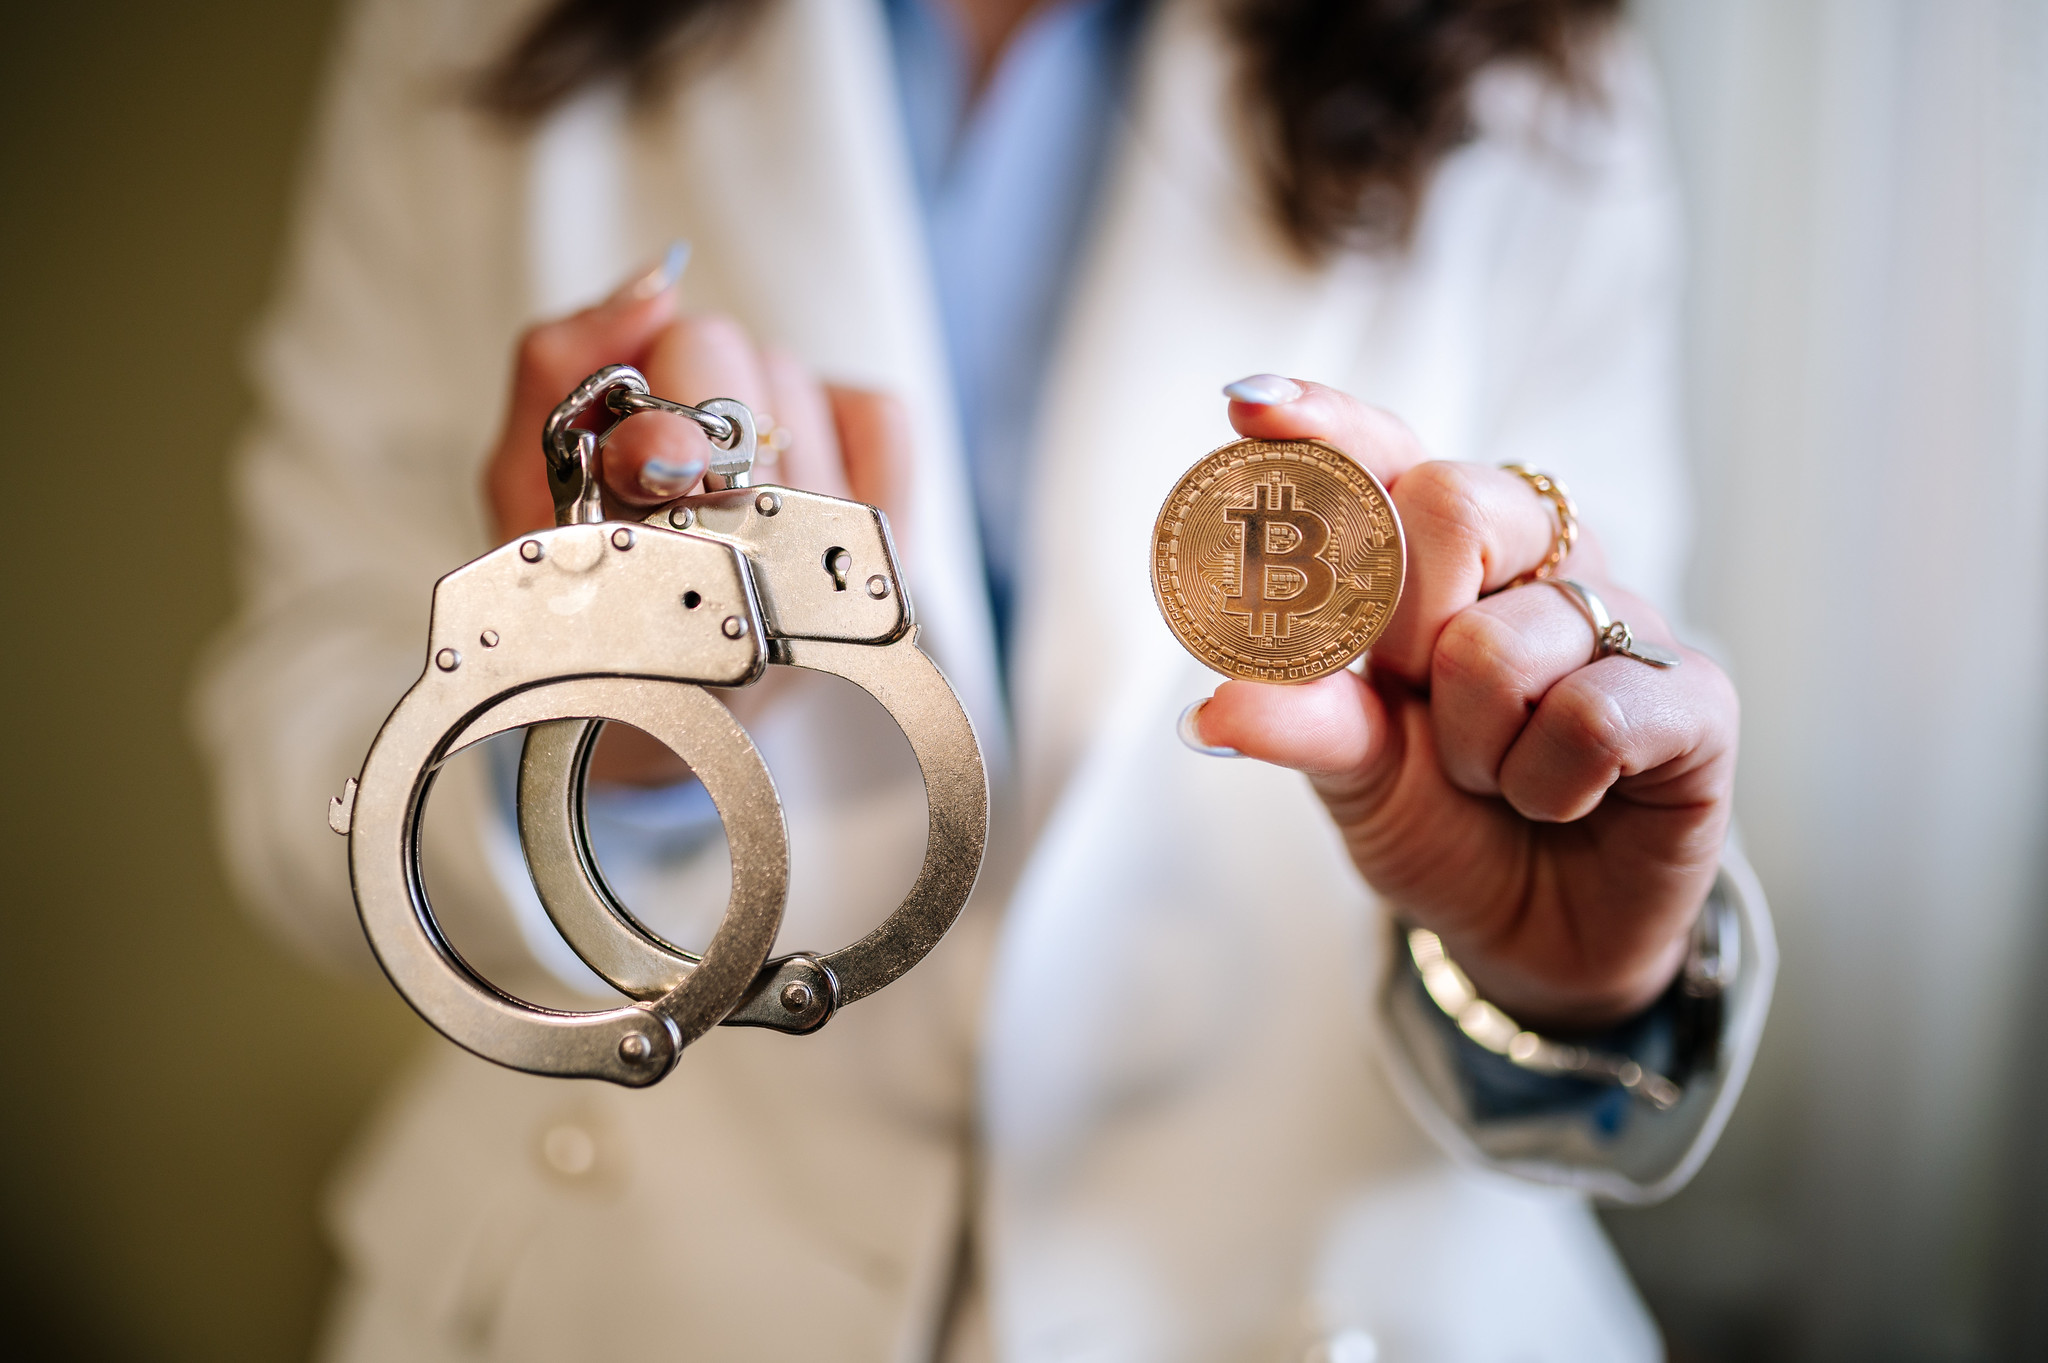 Criminal Zhong Pleads Guilty To Stealing 50,000 Bitcoin From Silk Road